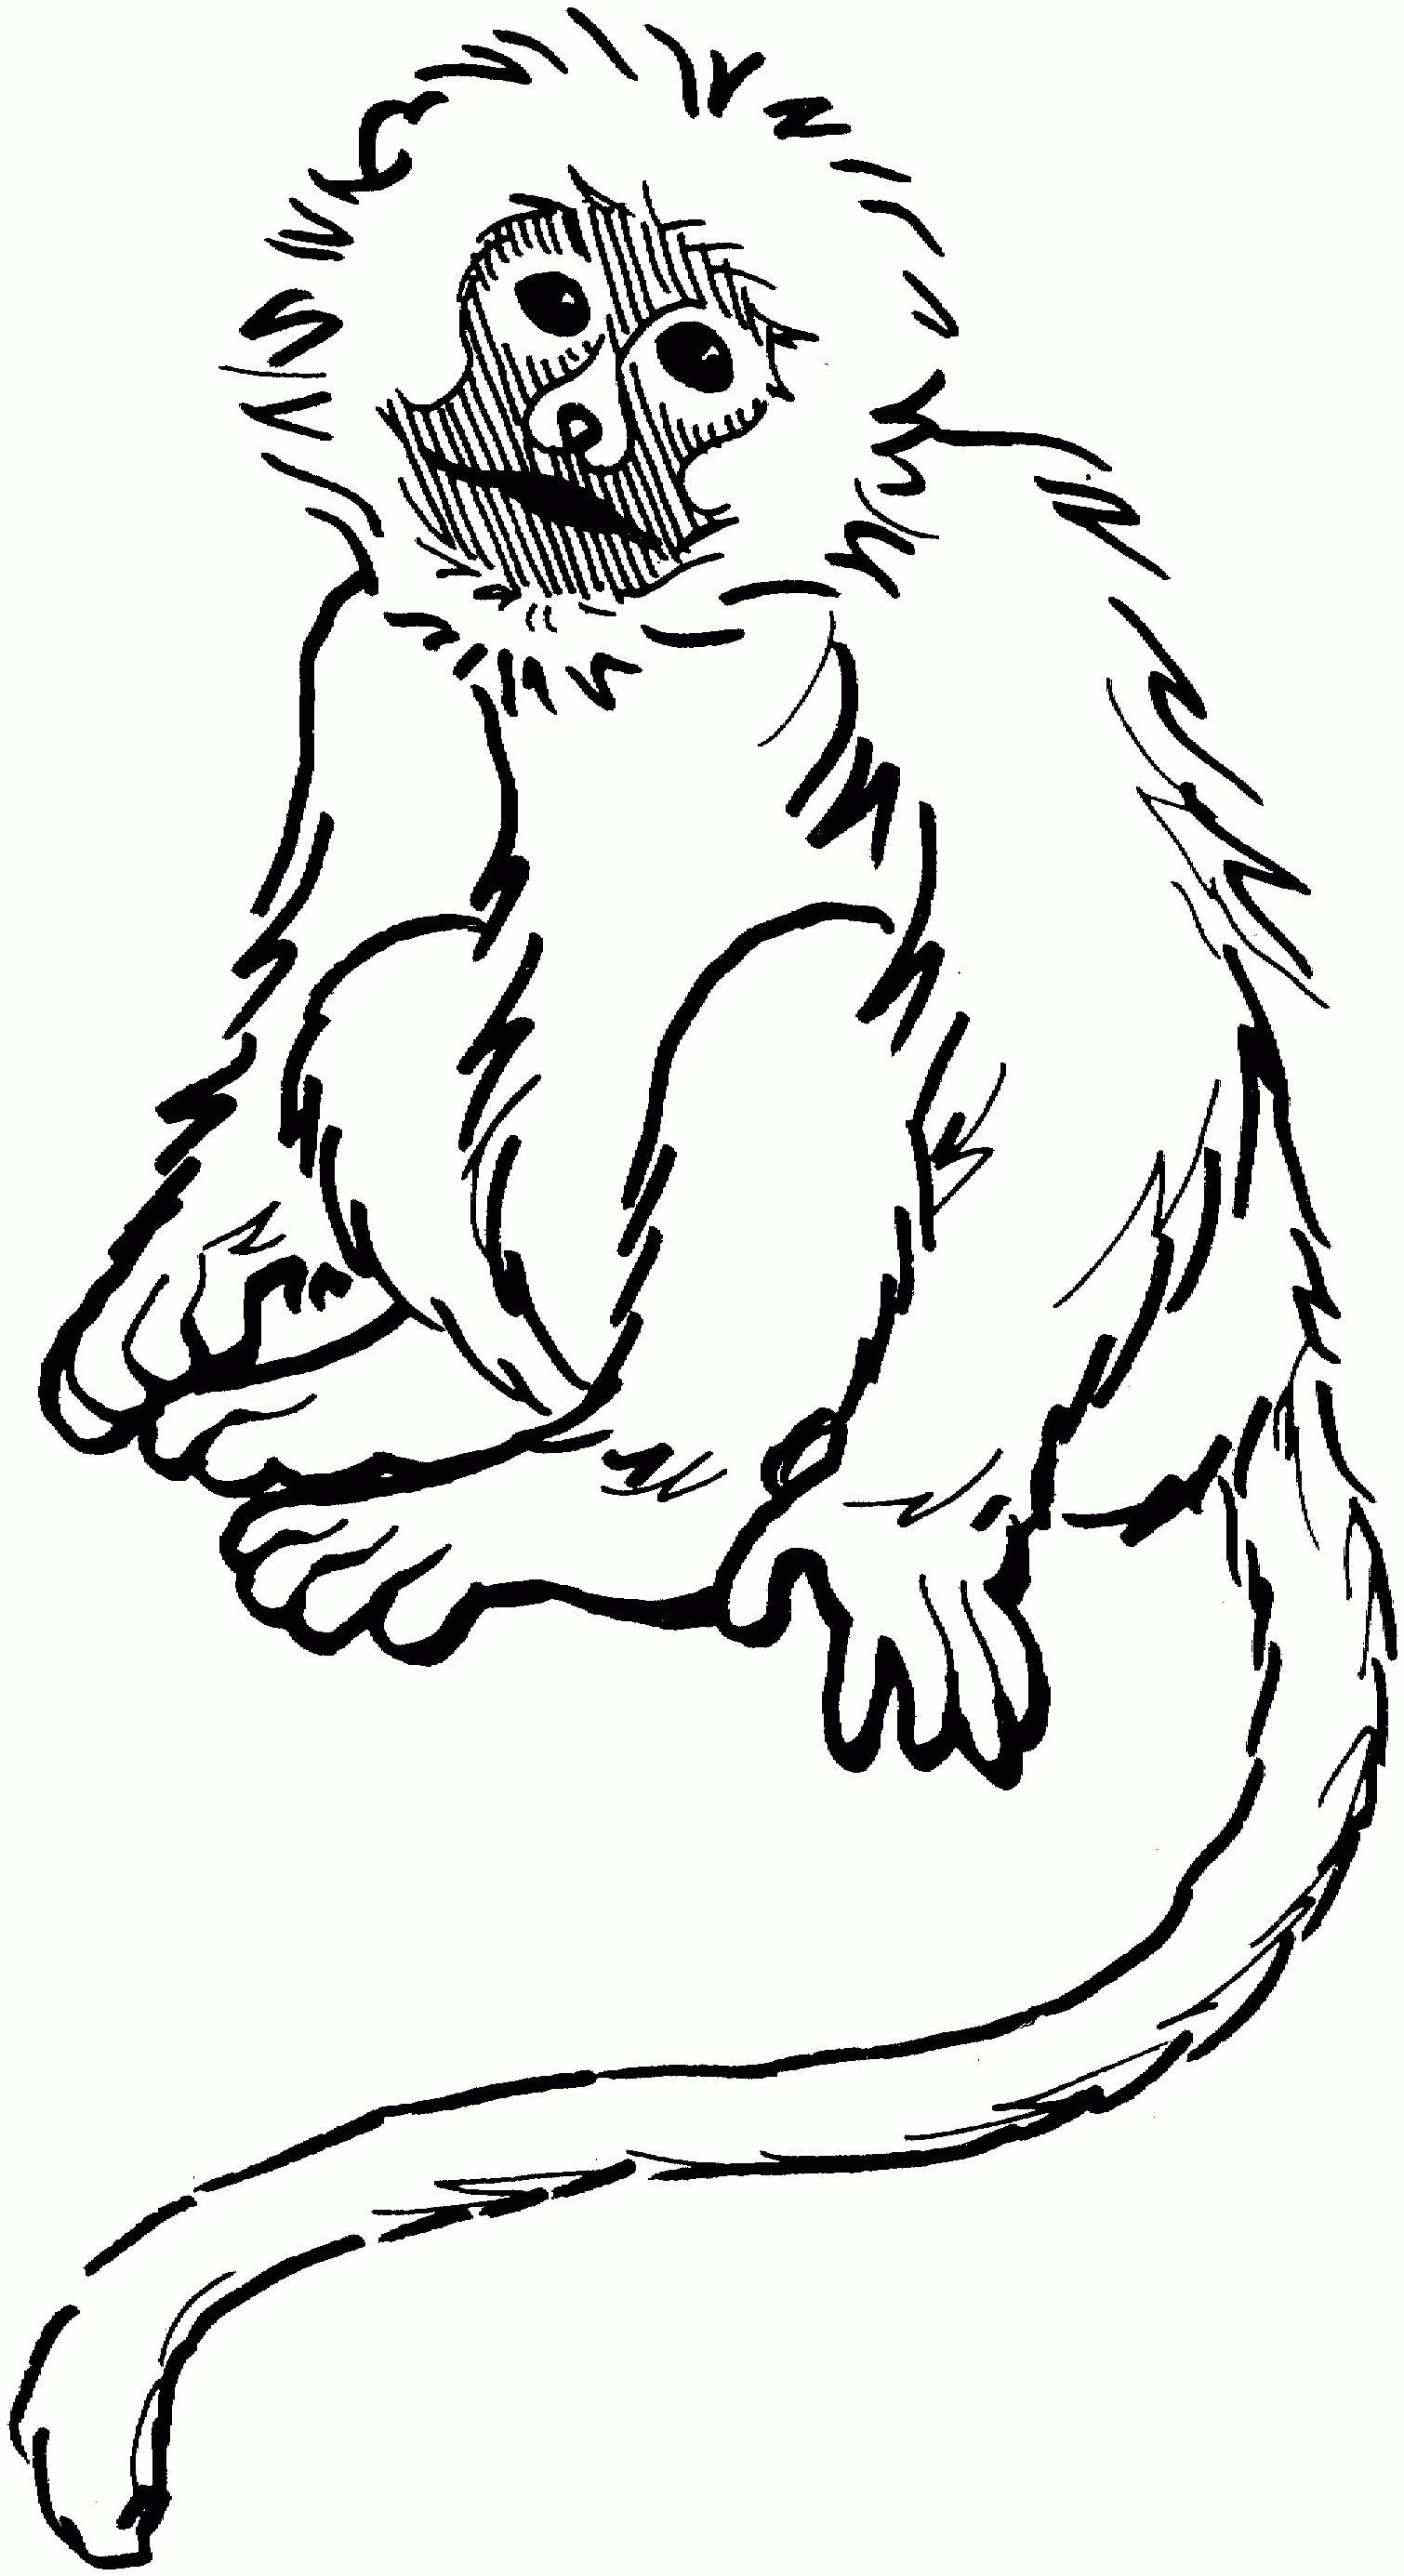 Free Printable Monkey Coloring Pages 1 510 2 771 Pixels To Print - Free Printable Monkey Coloring Sheets